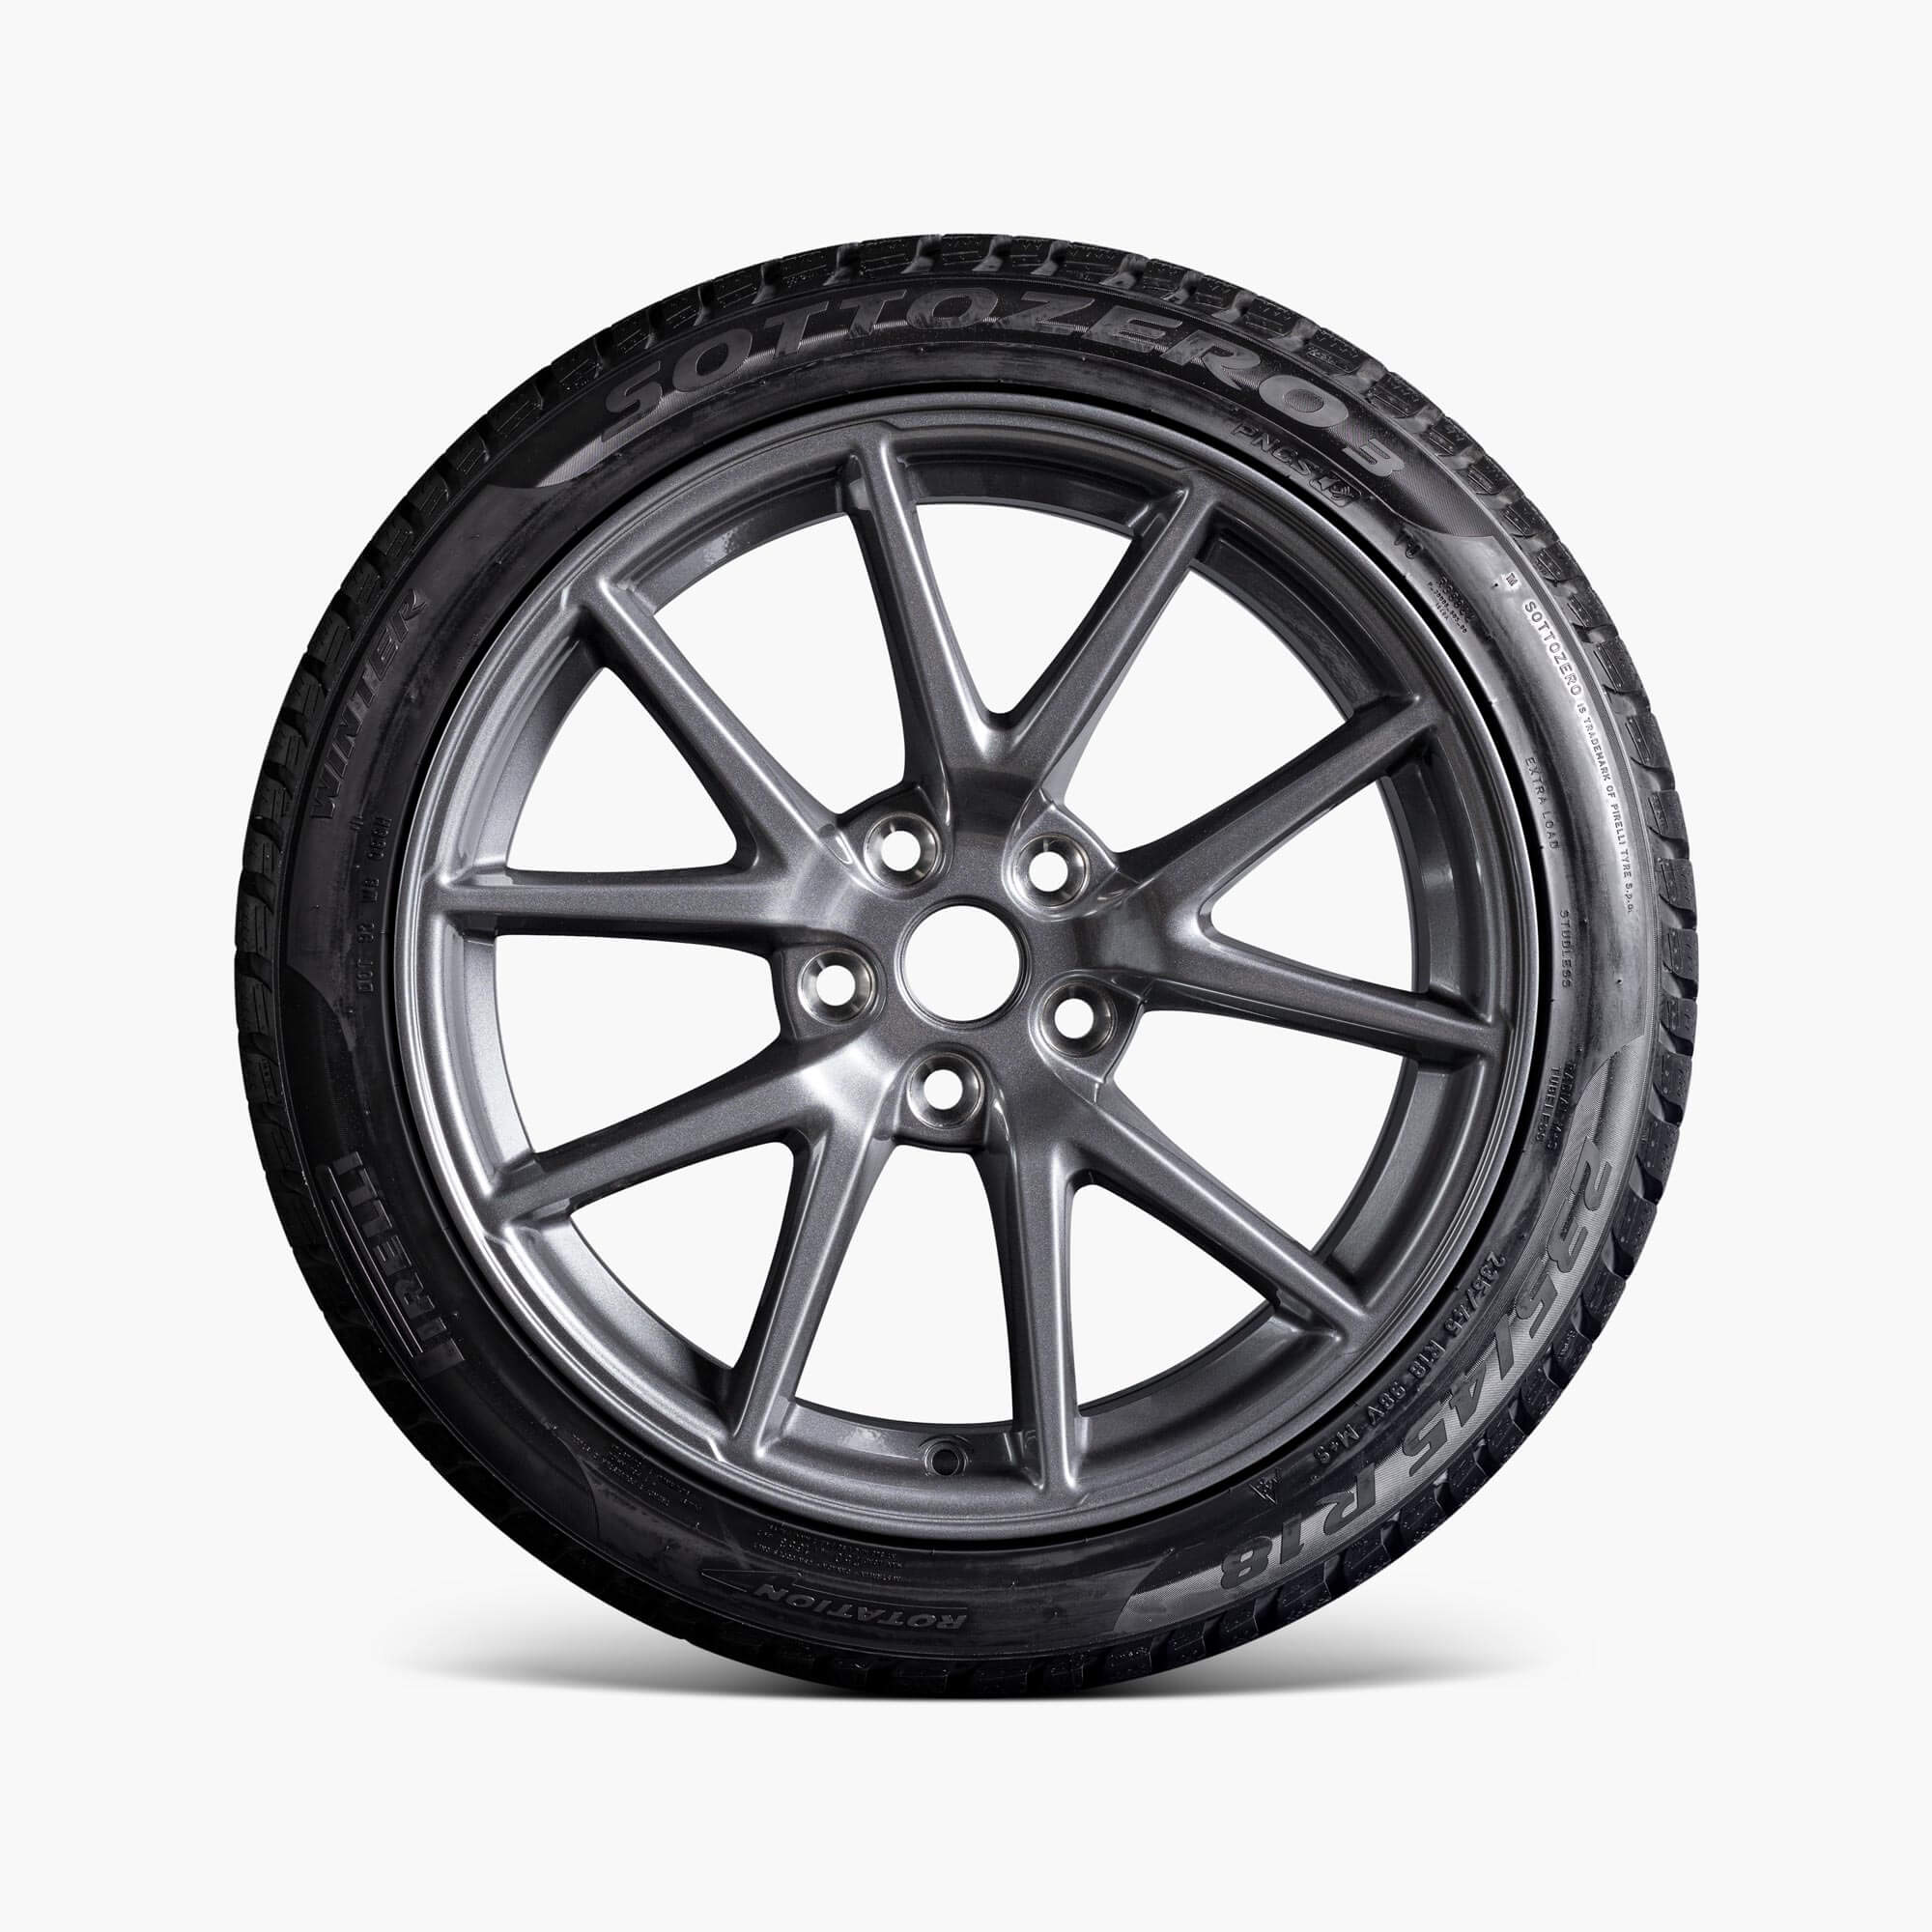 Model 3 18" Aero Wheel and Winter Tire Package